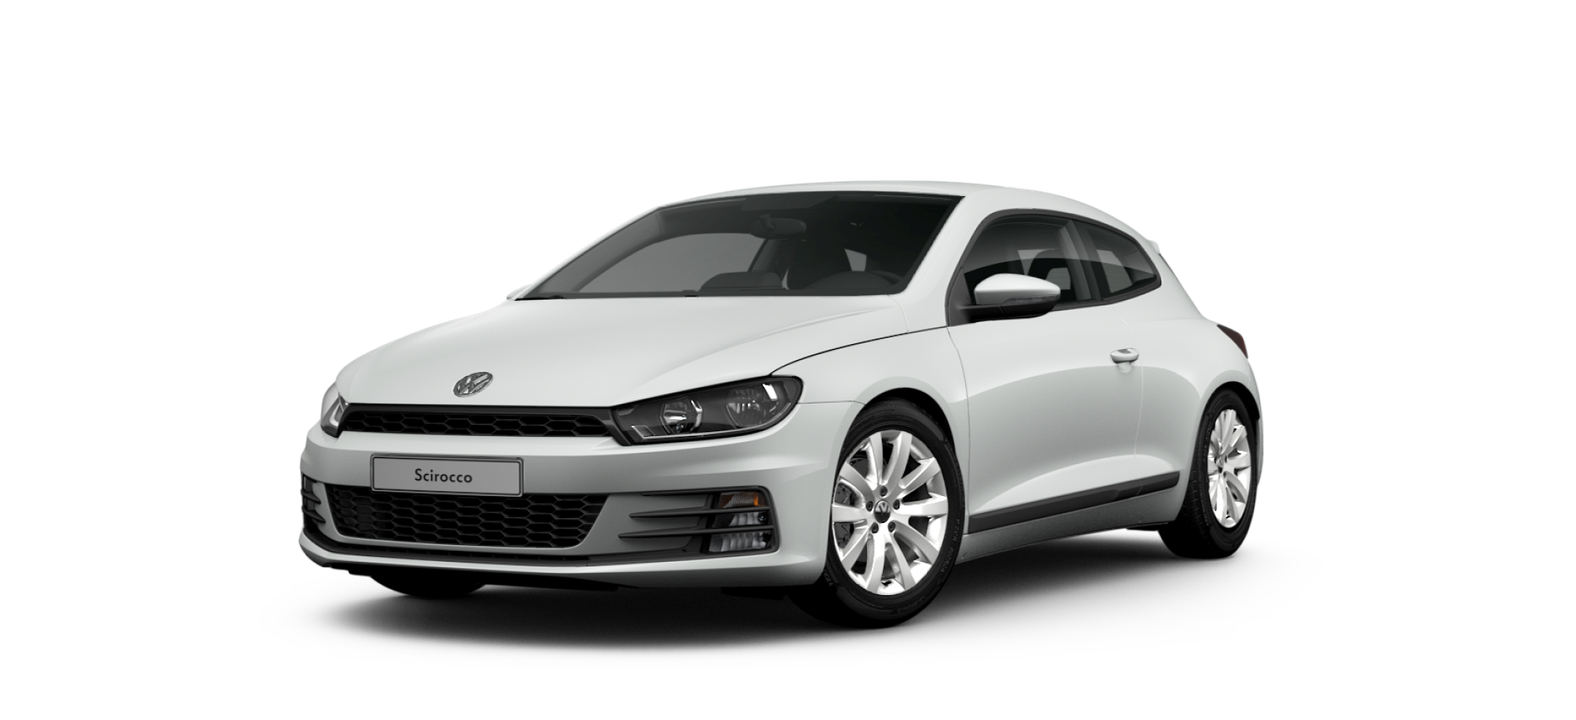 vw-scirocco-frontansicht